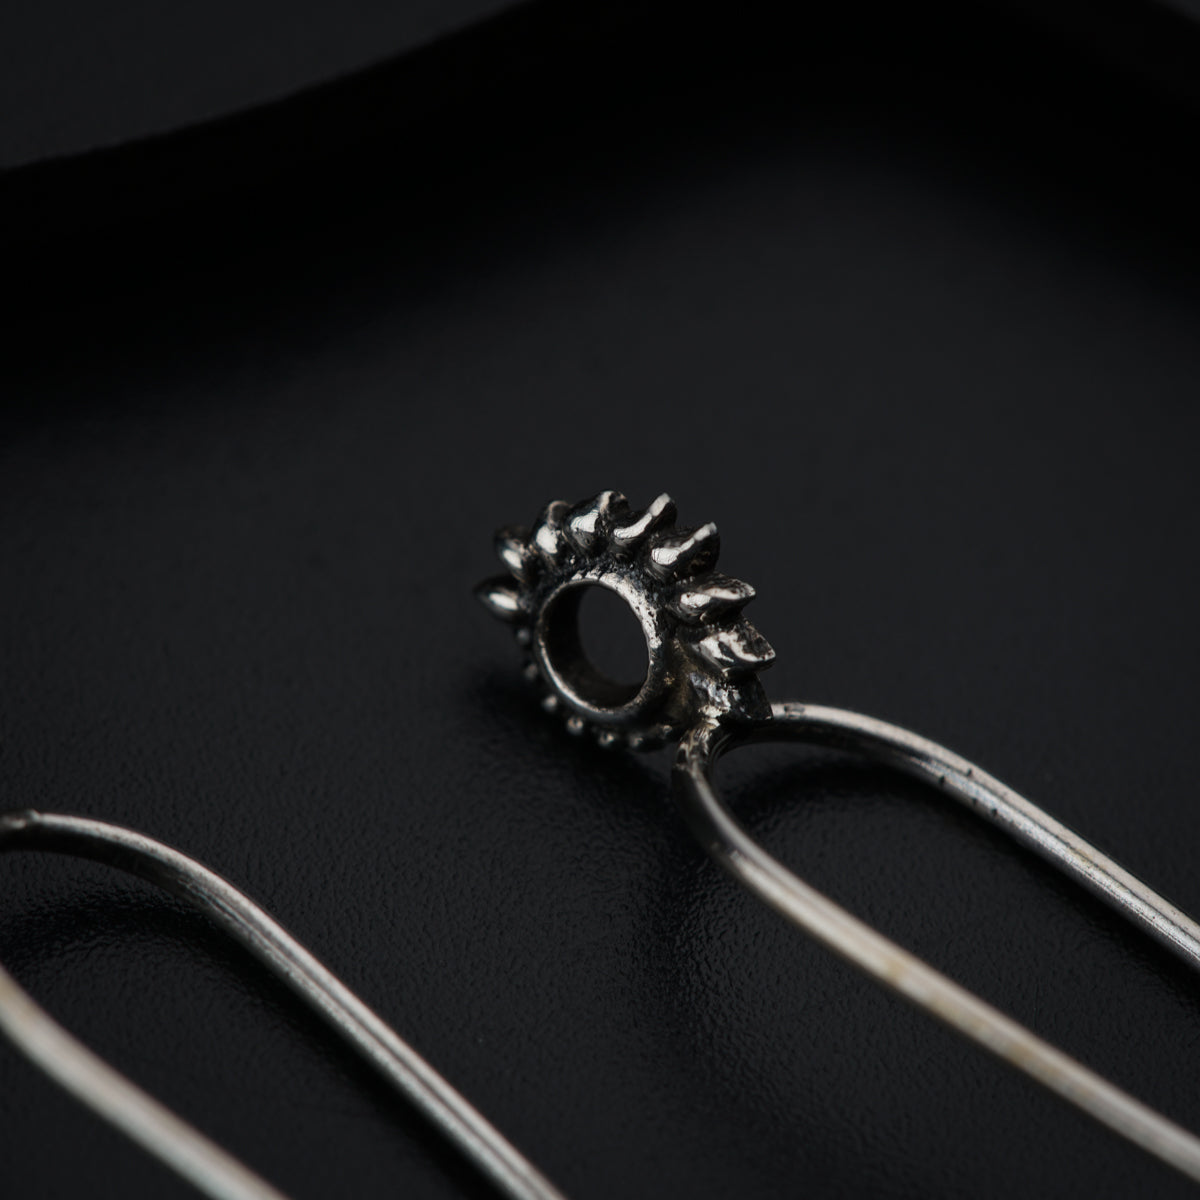 a pair of metal tongs sitting on top of a black surface